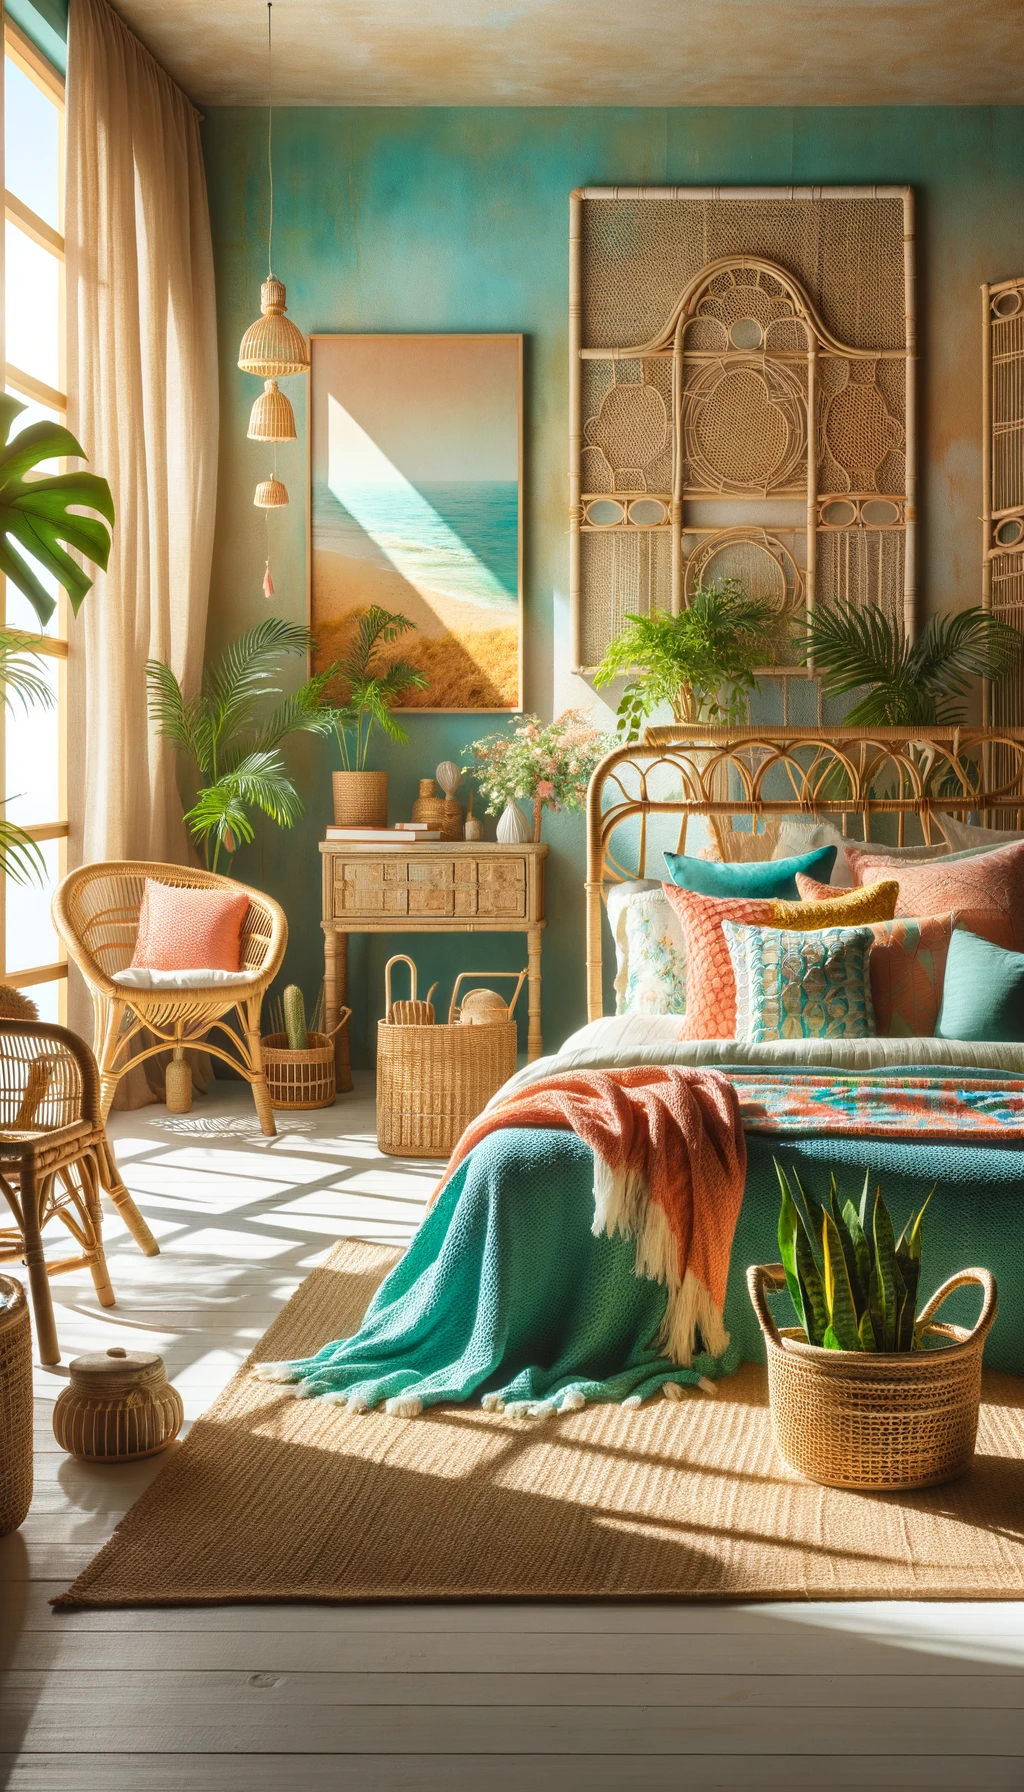 Use bright colors and natural materials to make your bedroom feel beachy and boho. Go for turquoise, coral, and sandy beige in your decor. For a tropical vibe, use rattan furniture and planters. This adds the calming effects of nature to your space.